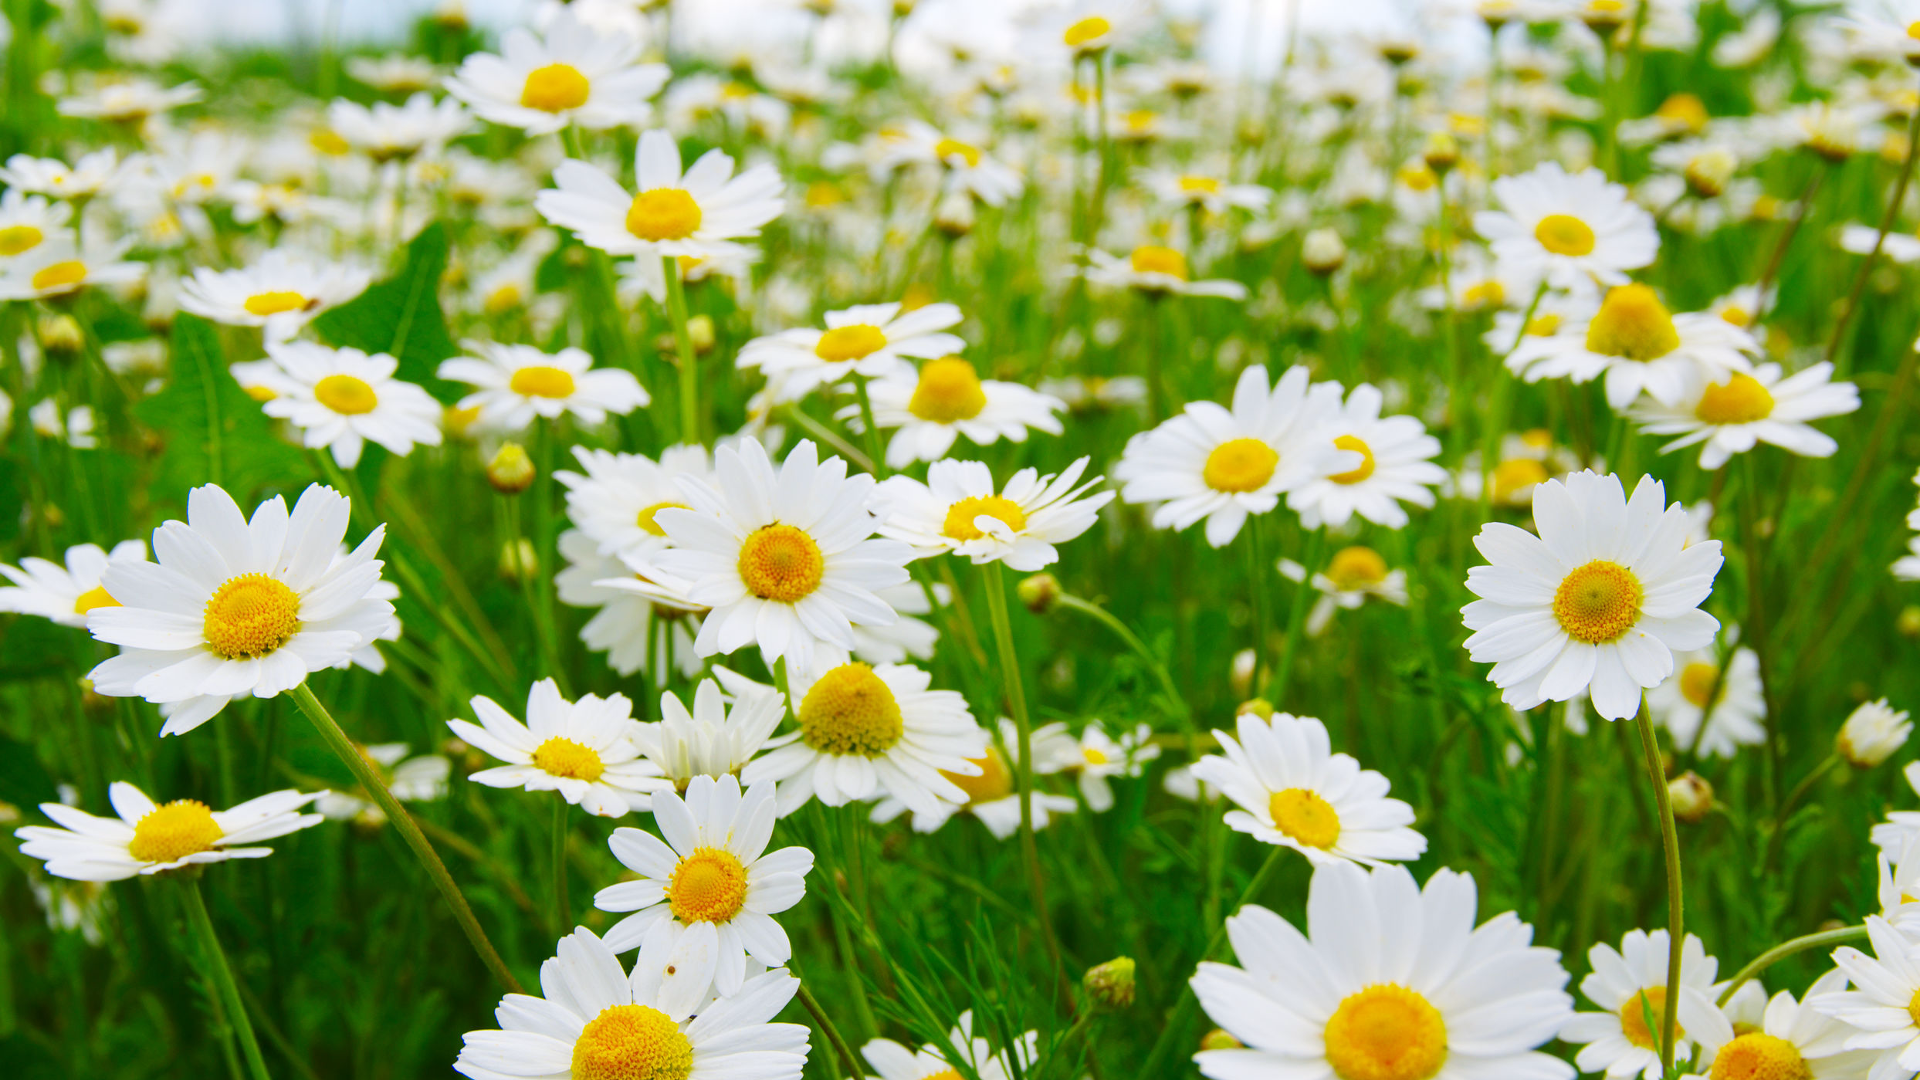 Chamomile: There’s More To This Sleepy Flower Than You May Think